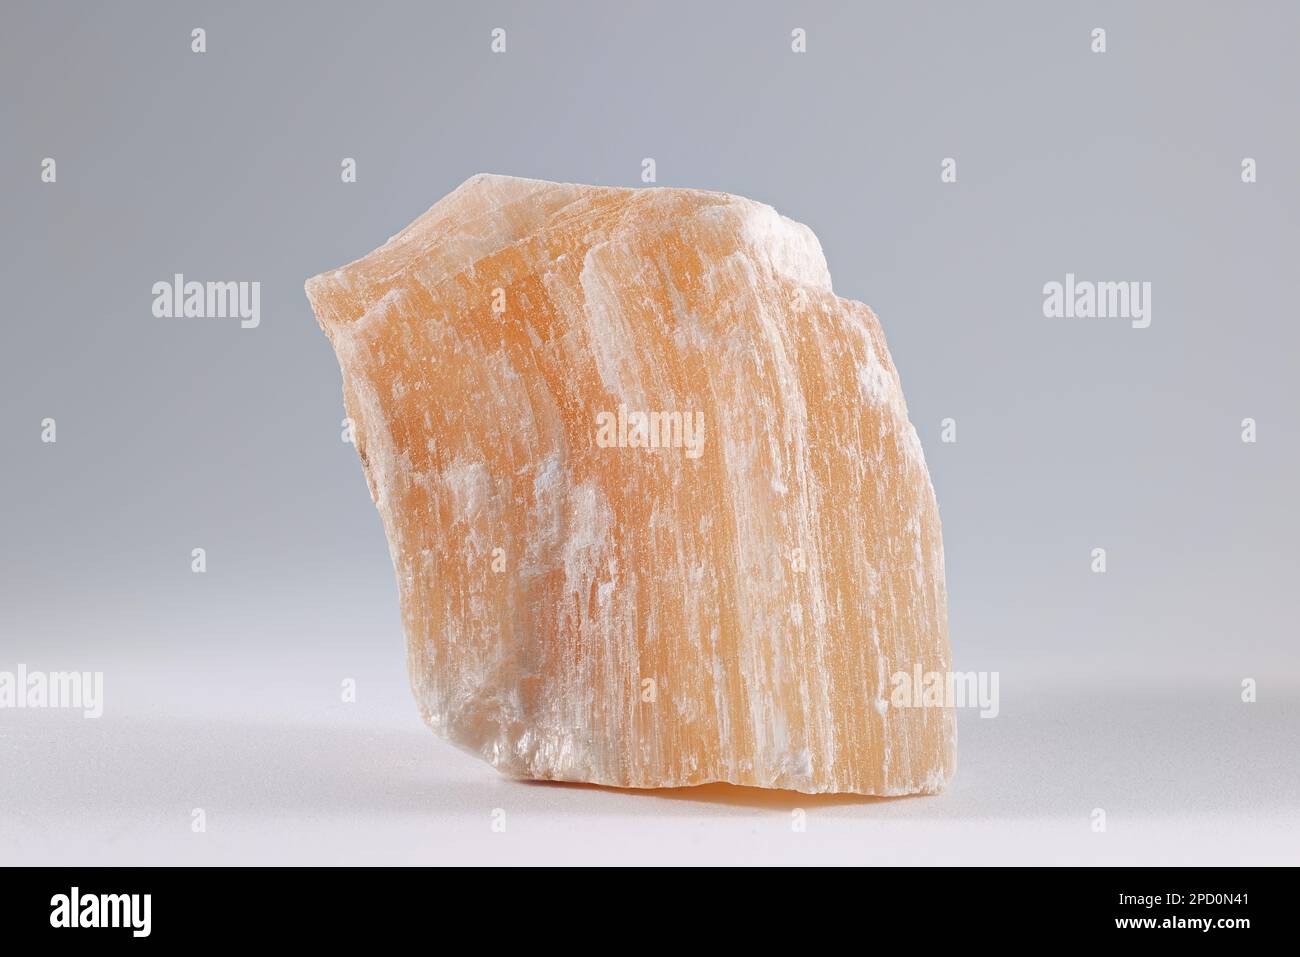 Gypsum is a soft sulfate mineral composed of calcium sulfate dihydrate. It is widely mined and used as a fertilizer.  Sample of red gypsym is from Mor Stock Photo